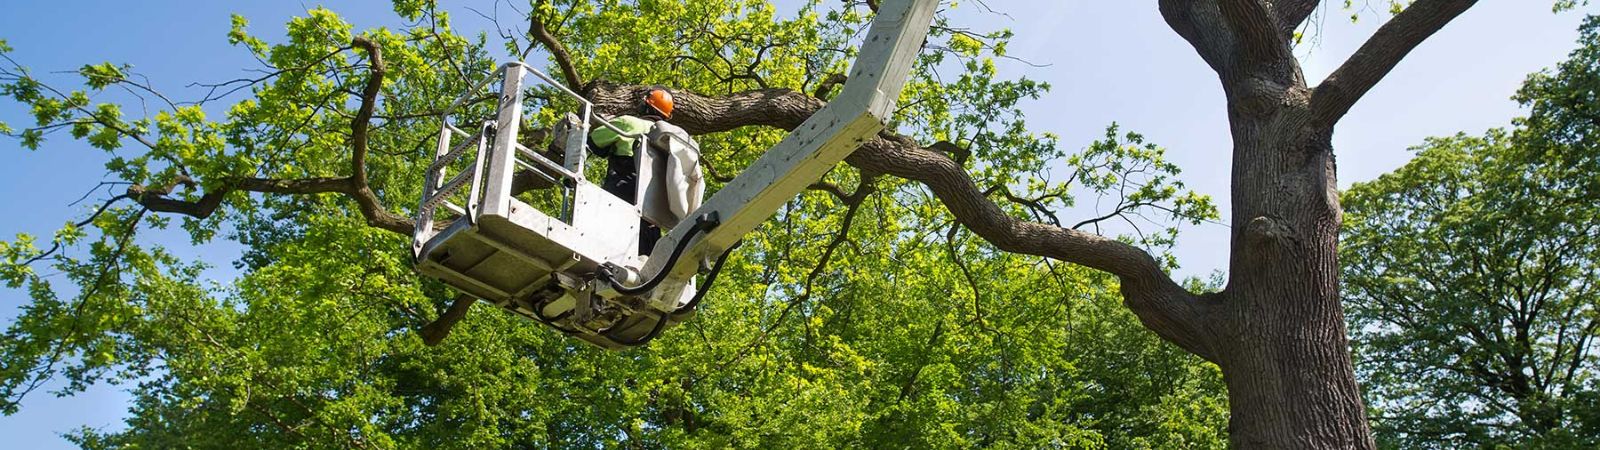 24-HOUR TREE SERVICES